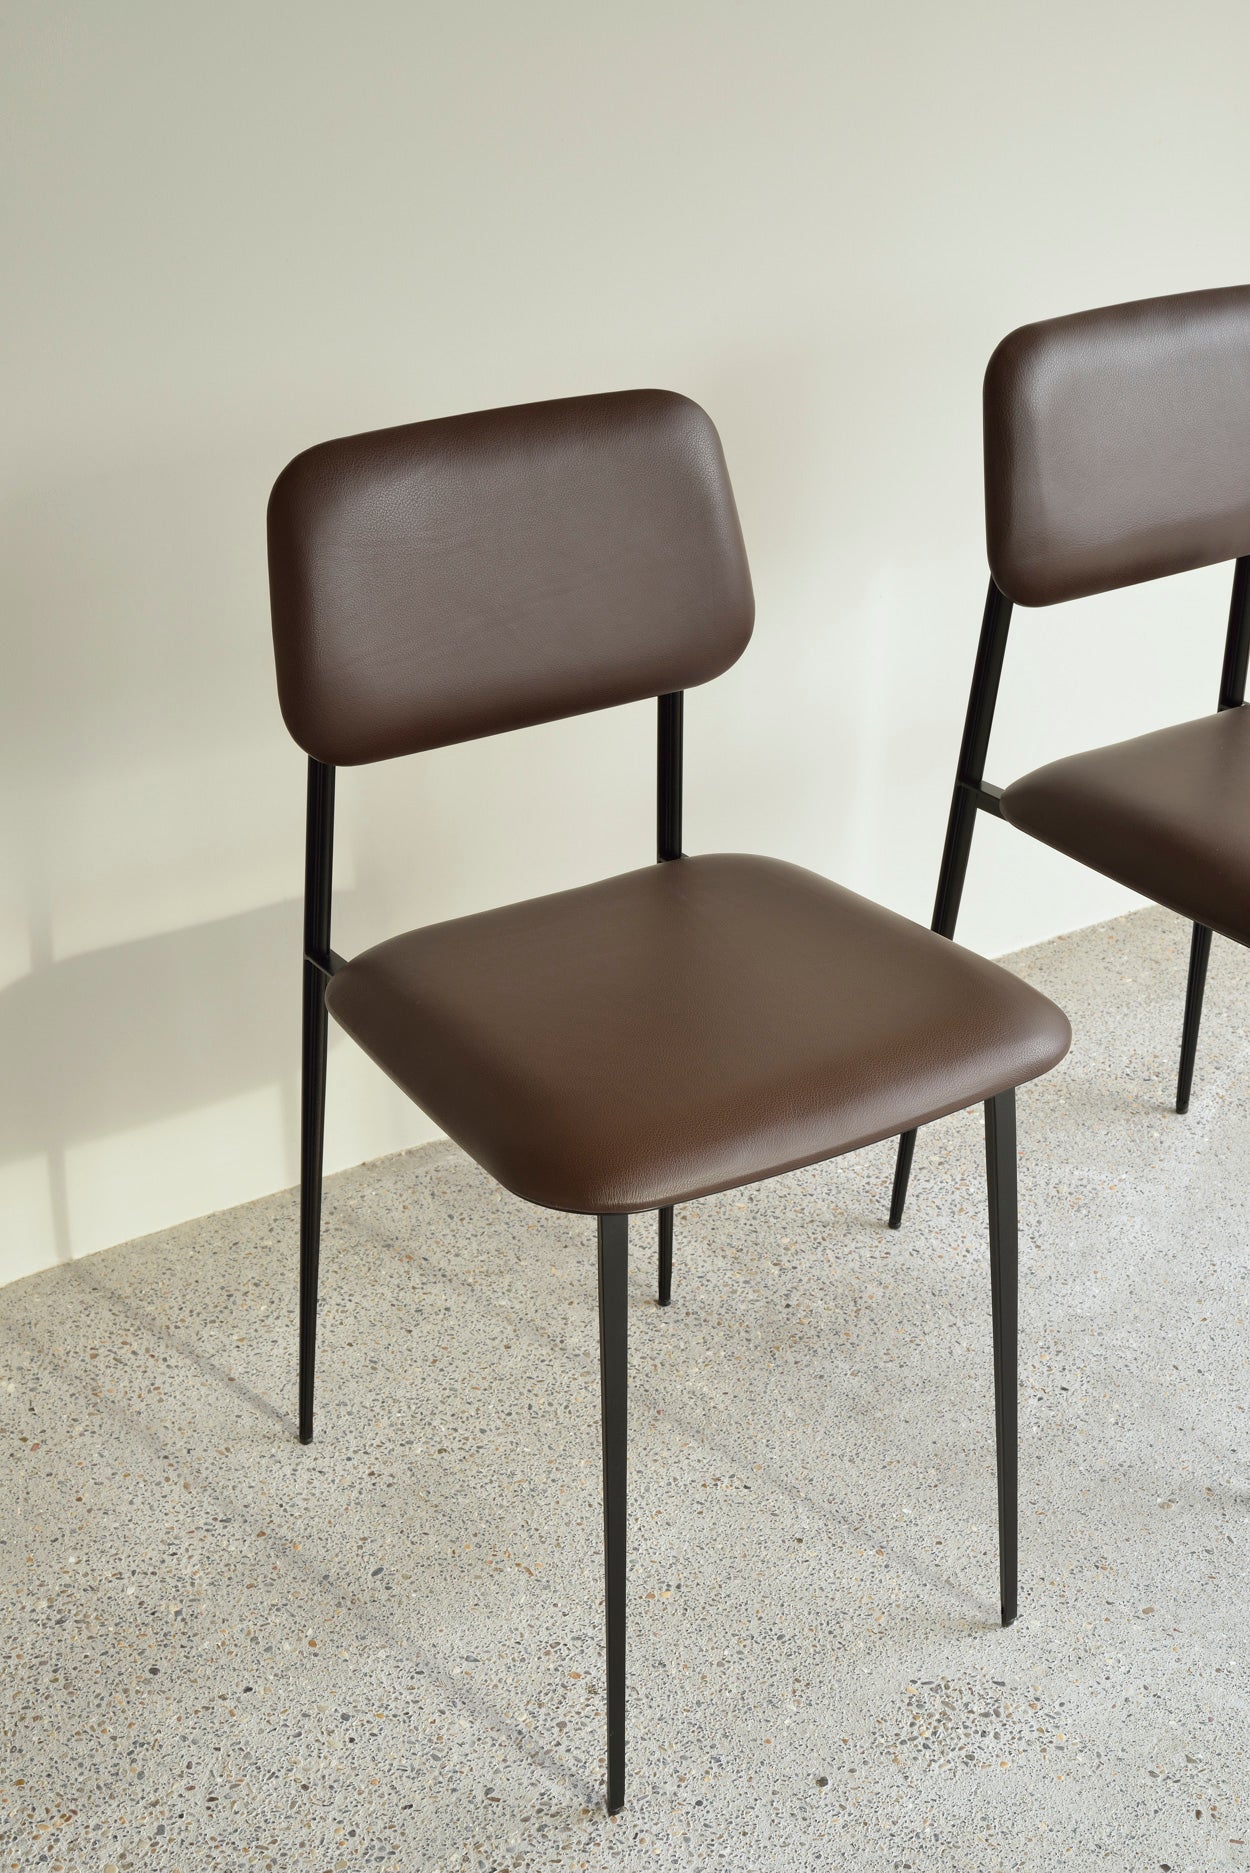 DC Dining Chair By Djordje Cukanovic | Chocolate Leather